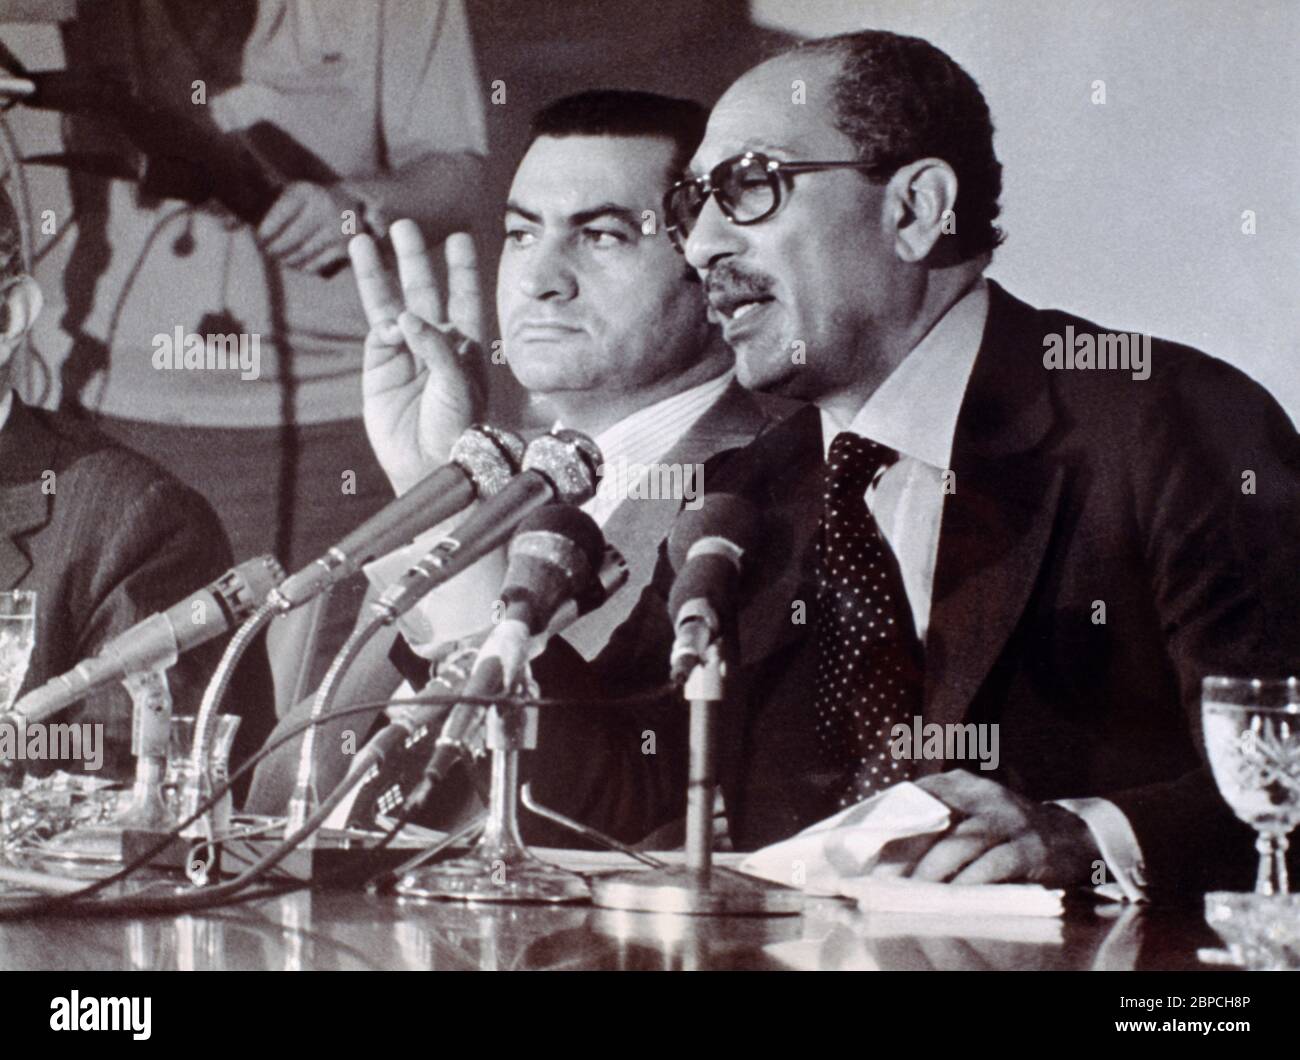 Anwar Sadat Third President of Egypt with Vice President Hosni Mubarak who later became the Fourth President of Egypt Stock Photo